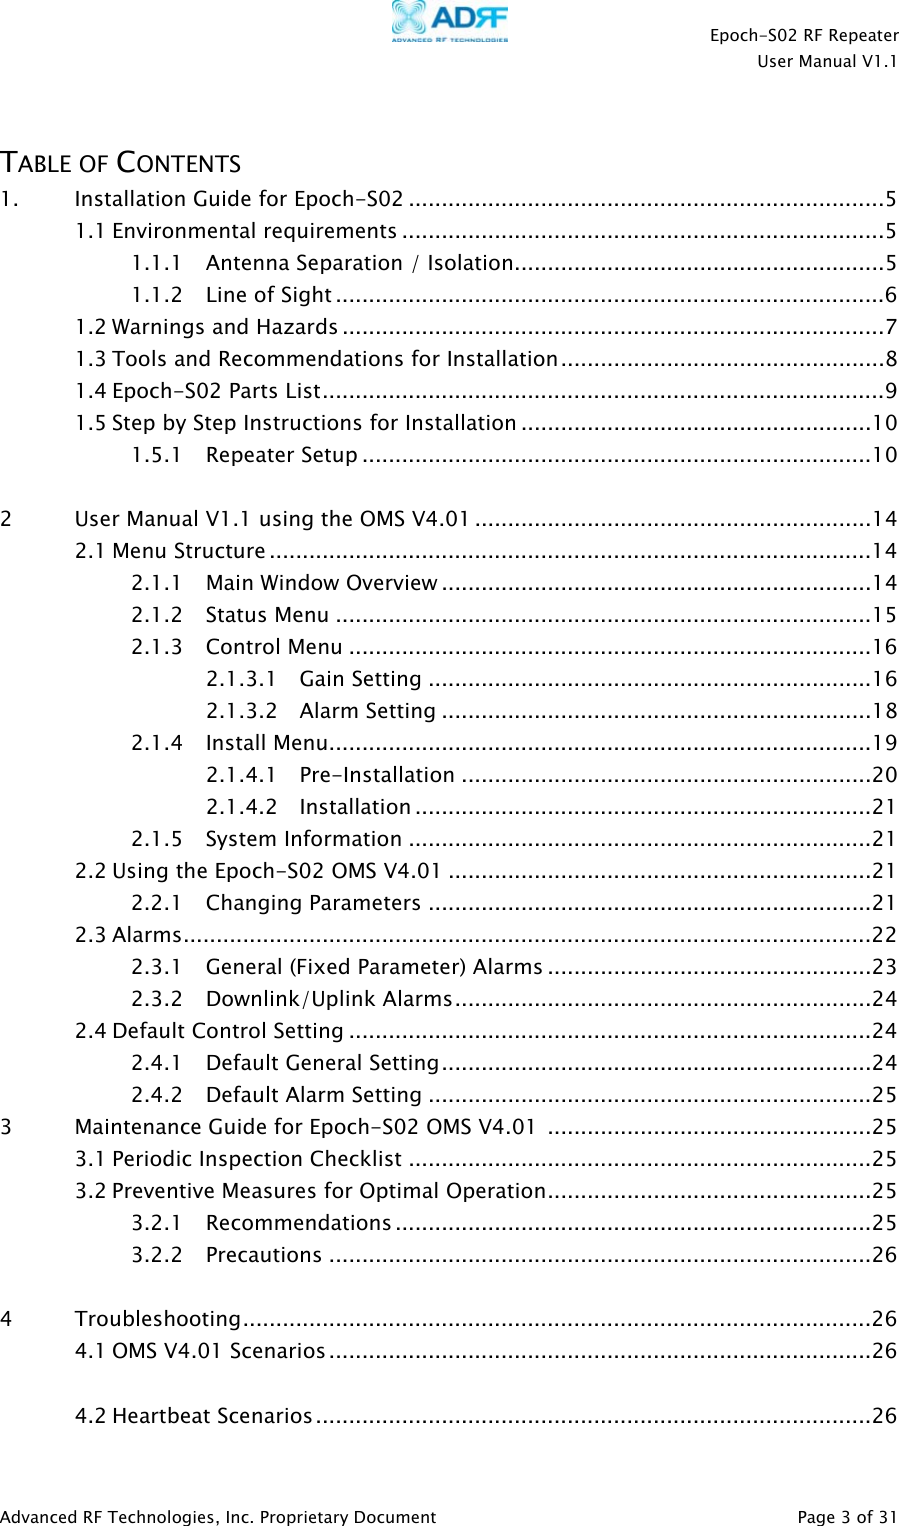    Epoch-S02 RF Repeater  User Manual V1.1   TABLE OF CONTENTS 1. Installation Guide for Epoch-S02 ........................................................................5 1.1 Environmental requirements .........................................................................5 1.1.1 Antenna Separation / Isolation........................................................5 1.1.2 Line of Sight ...................................................................................6 1.2 Warnings and Hazards ..................................................................................7 1.3 Tools and Recommendations for Installation.................................................8 1.4 Epoch-S02 Parts List.....................................................................................9 1.5 Step by Step Instructions for Installation .....................................................10 1.5.1 Repeater Setup .............................................................................10  2  User Manual V1.1 using the OMS V4.01............................................................14 2.1 Menu Structure ...........................................................................................14 2.1.1 Main Window Overview .................................................................14 2.1.2 Status Menu .................................................................................15 2.1.3 Control Menu ...............................................................................16 2.1.3.1 Gain Setting ...................................................................16 2.1.3.2 Alarm Setting .................................................................18 2.1.4 Install Menu..................................................................................19 2.1.4.1 Pre-Installation ..............................................................20 2.1.4.2 Installation .....................................................................21 2.1.5 System Information ......................................................................21 2.2 Using the Epoch-S02 OMS V4.01 ................................................................21 2.2.1 Changing Parameters ...................................................................21 2.3 Alarms........................................................................................................22 2.3.1 General (Fixed Parameter) Alarms .................................................23 2.3.2 Downlink/Uplink Alarms...............................................................24 2.4 Default Control Setting ...............................................................................24 2.4.1 Default General Setting.................................................................24 2.4.2 Default Alarm Setting ...................................................................25 3  Maintenance Guide for Epoch-S02 OMS V4.01  .................................................25 3.1 Periodic Inspection Checklist ......................................................................25 3.2 Preventive Measures for Optimal Operation.................................................25 3.2.1 Recommendations ........................................................................25 3.2.2 Precautions ..................................................................................26  4  Troubleshooting...............................................................................................26 4.1 OMS V4.01 Scenarios..................................................................................26  4.2 Heartbeat Scenarios....................................................................................26 Advanced RF Technologies, Inc. Proprietary Document   Page 3 of 31  